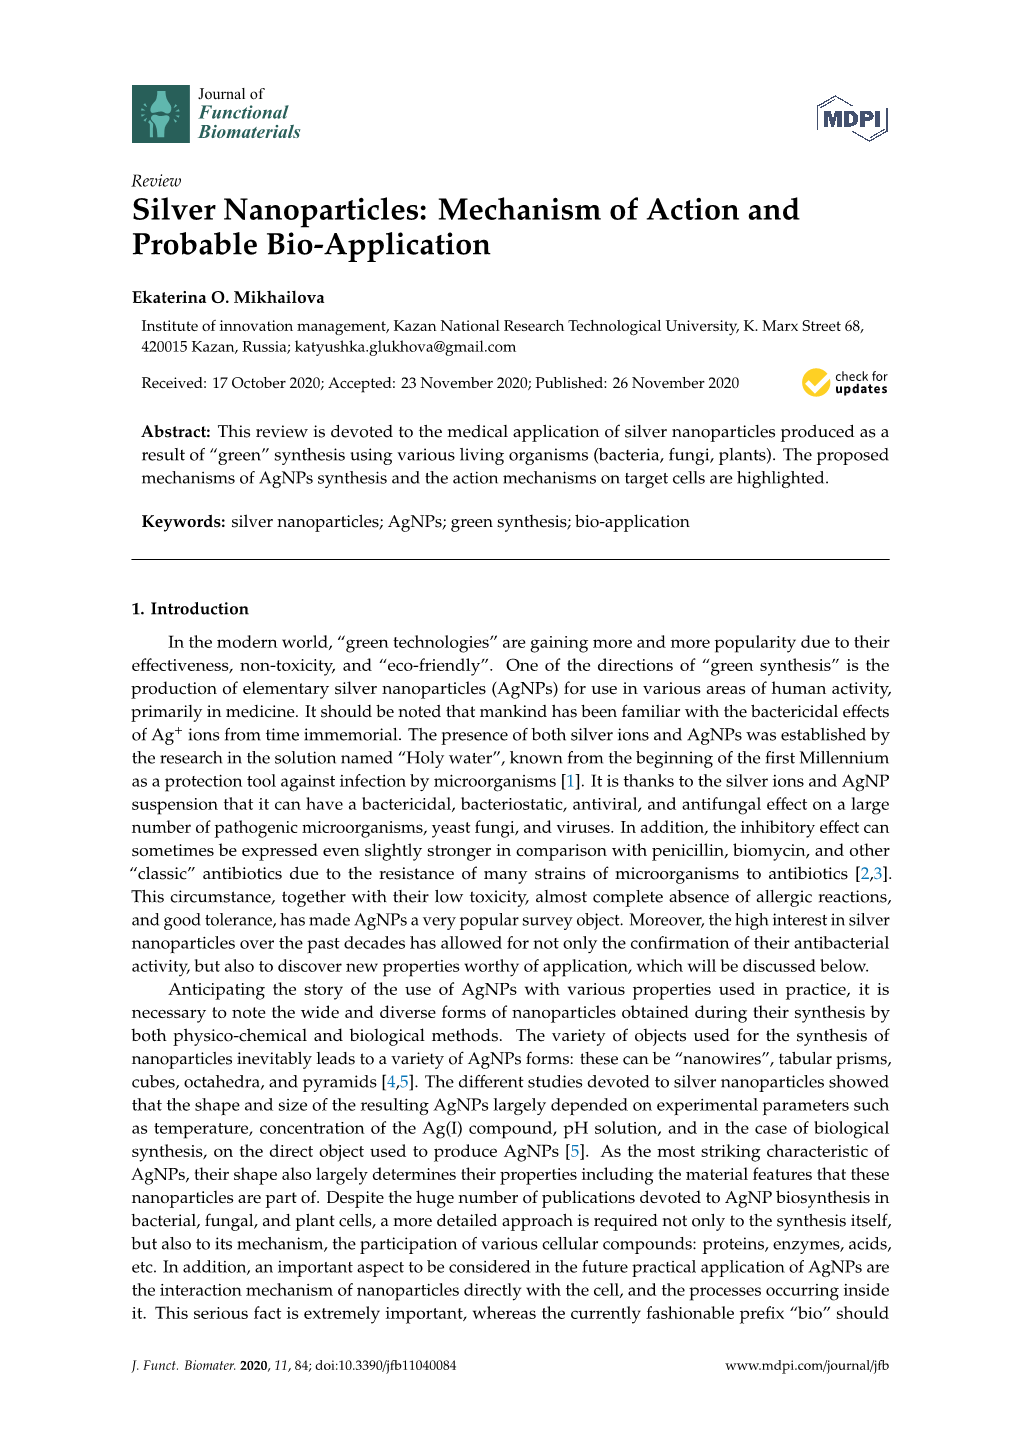 Silver Nanoparticles: Mechanism of Action and Probable Bio-Application